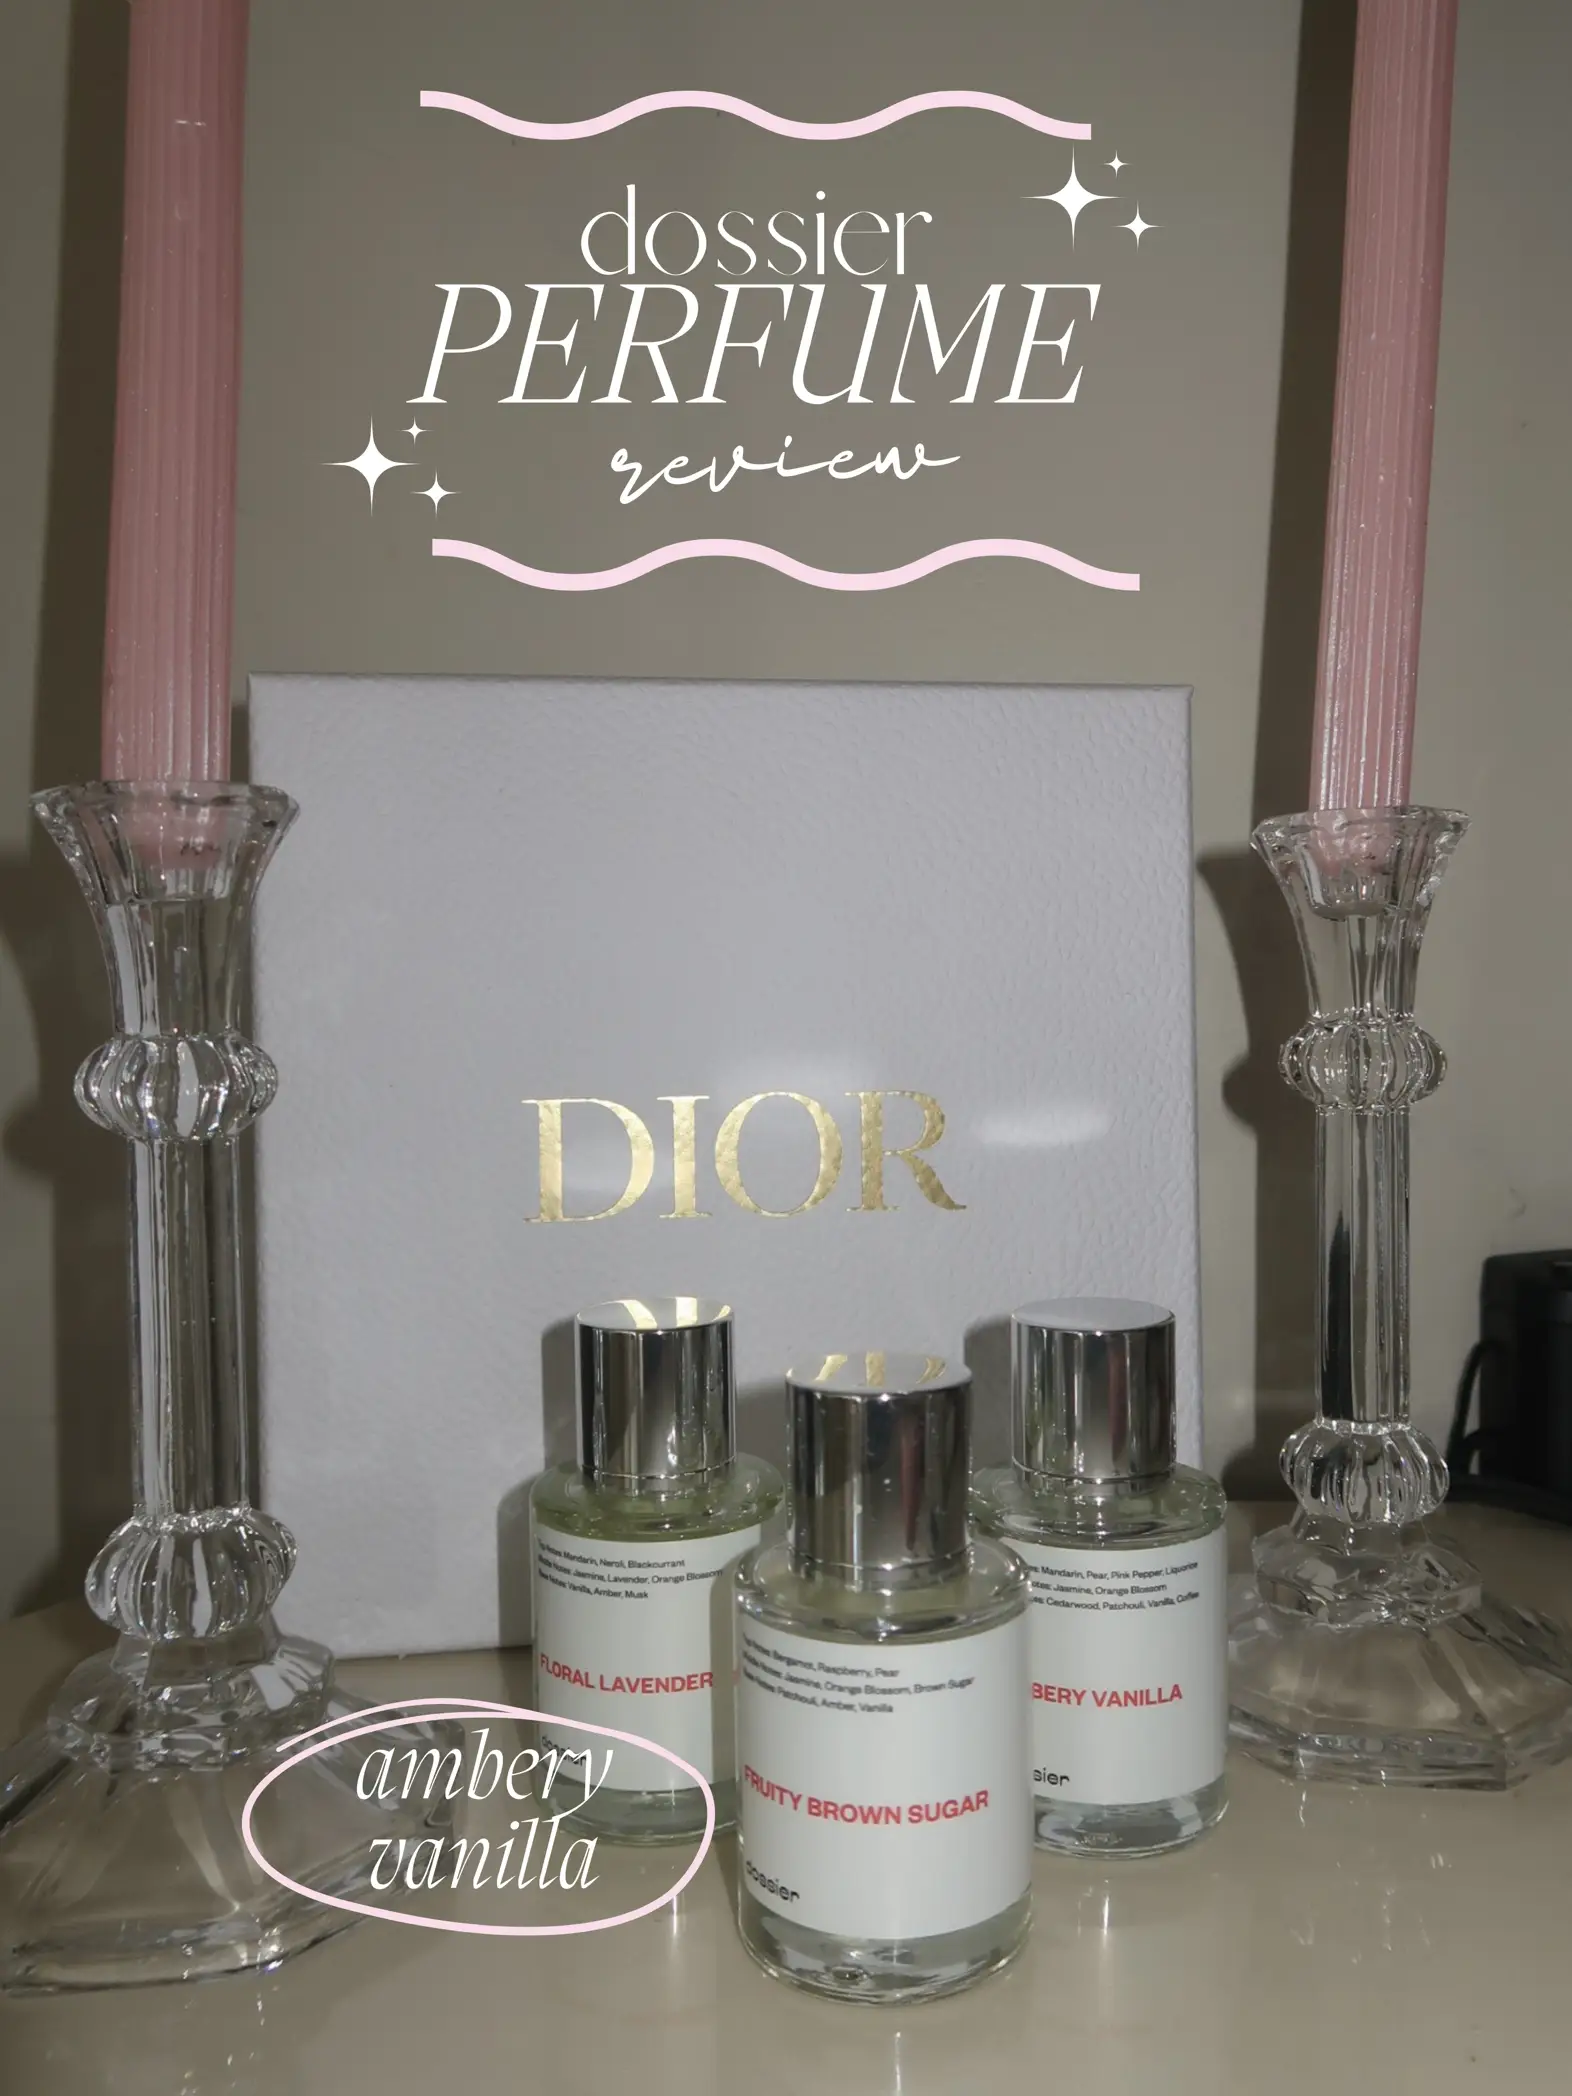 Dossier Perfume Review, Gallery posted by Nikki Rodri